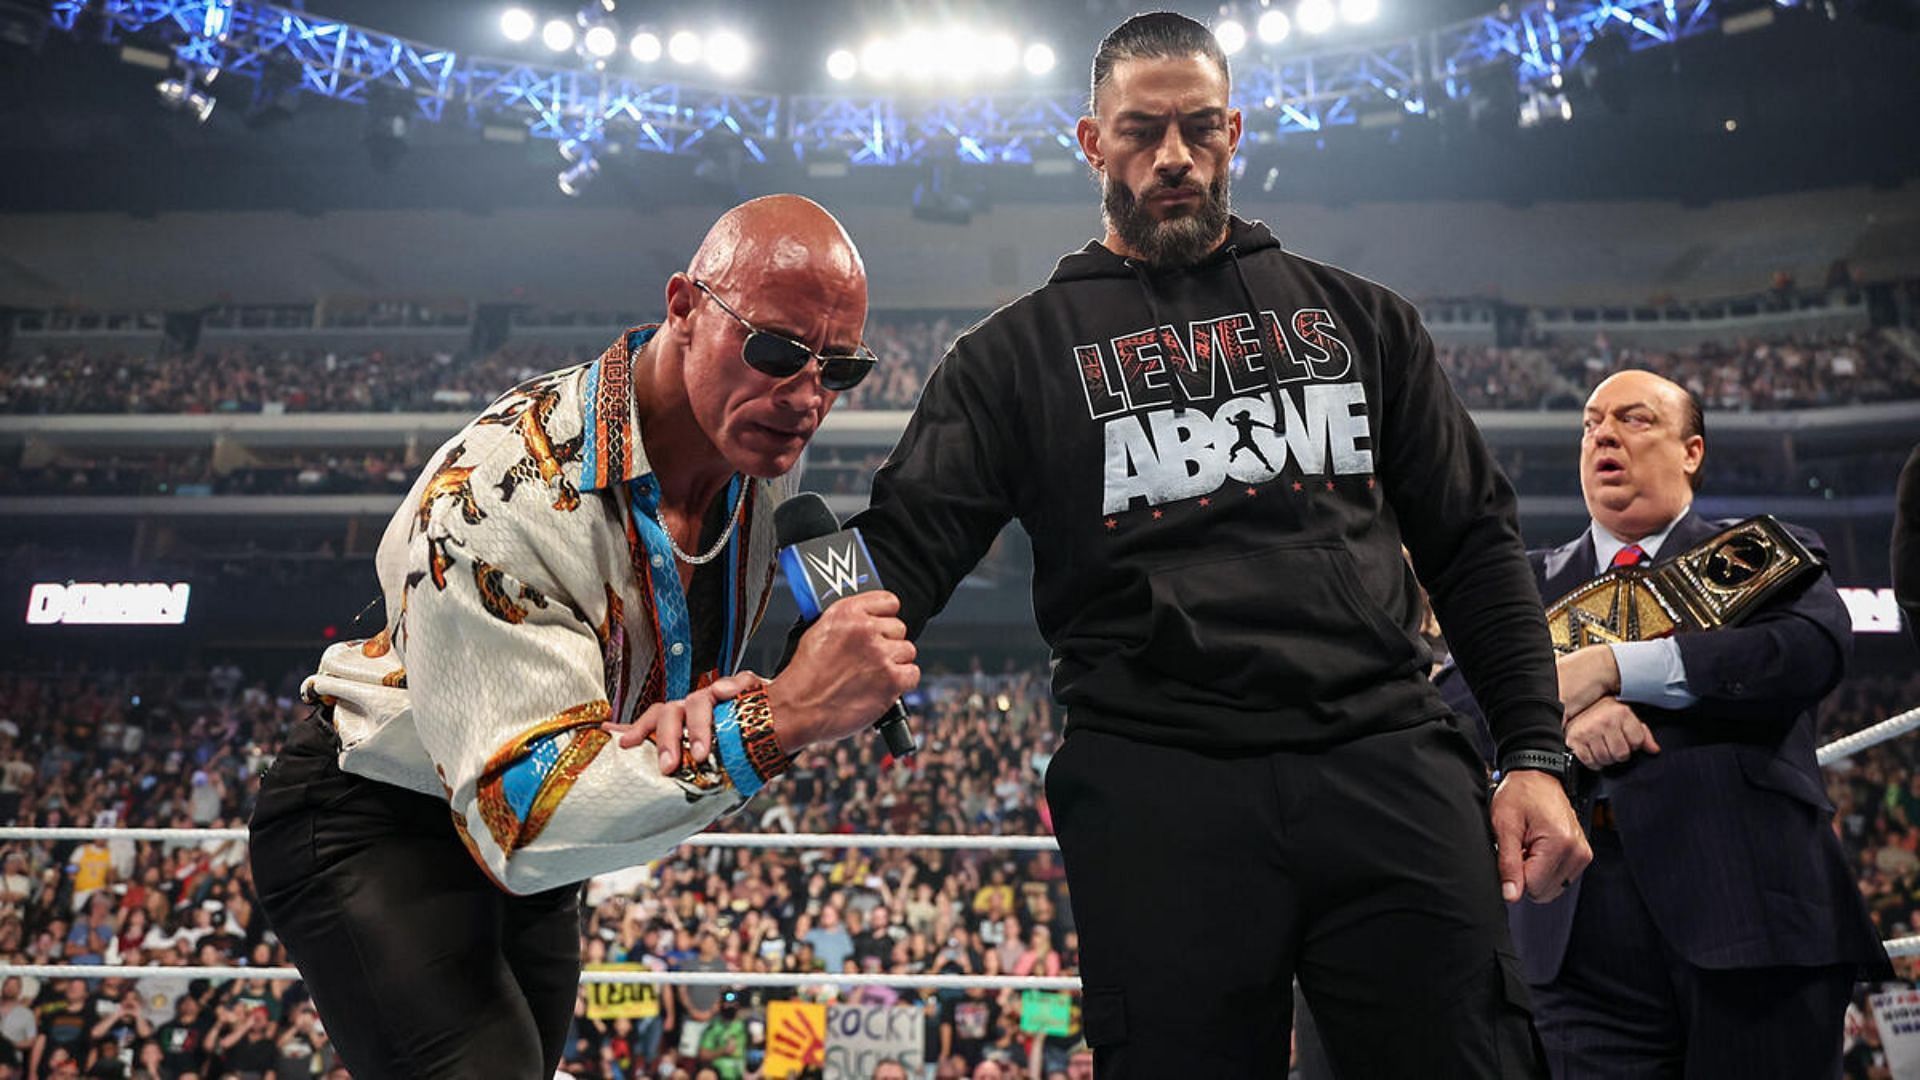 The Rock, Roman Reigns, and Paul Heyman are in The Bloodline